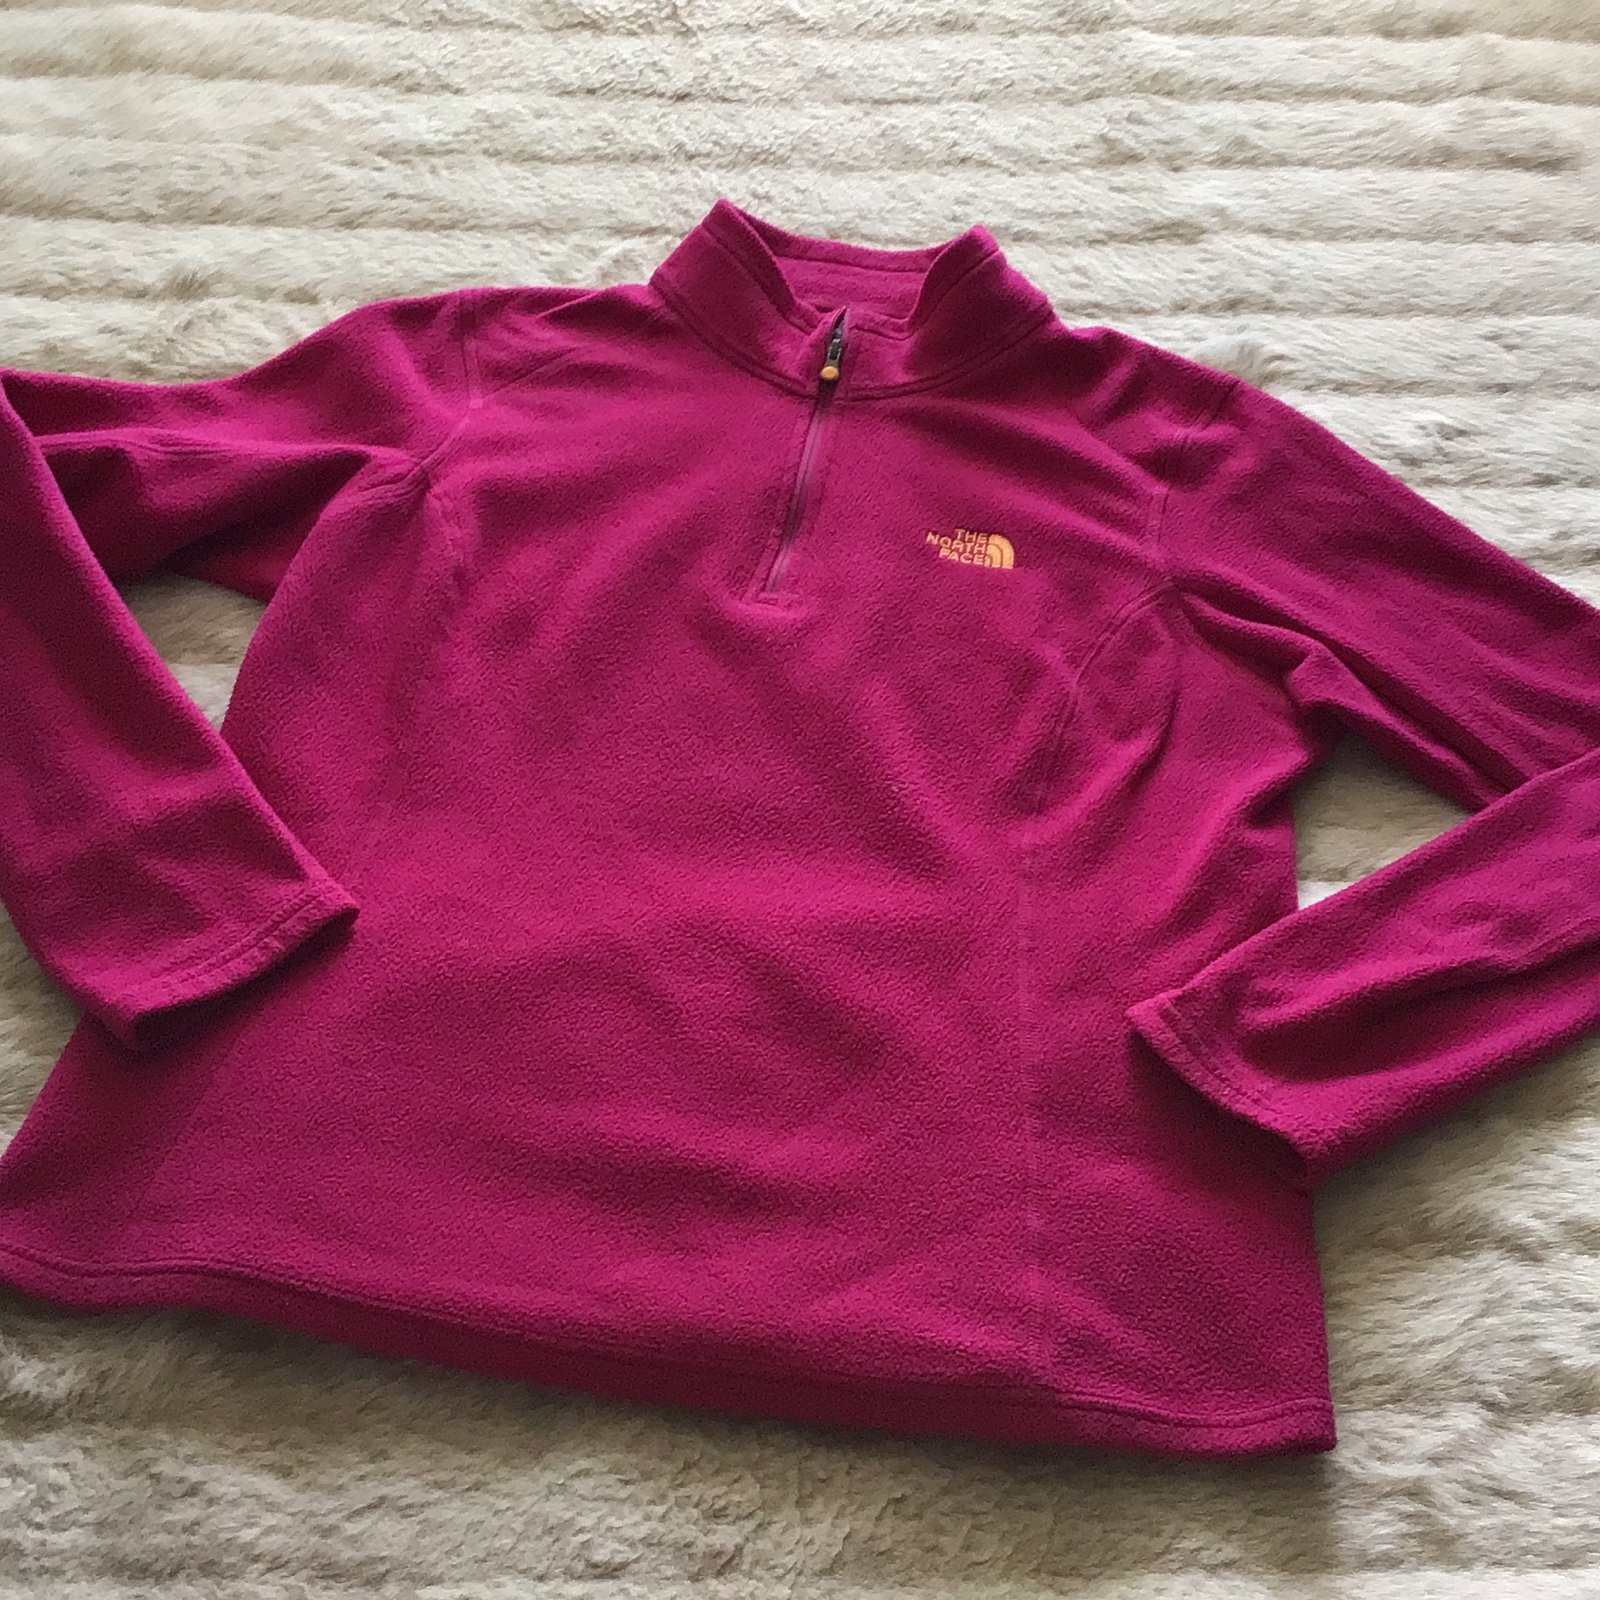 Wholesale price North Face Lightweight 1/4 Zip Berry Fleece L KTw69Uk0o Buying Cheap